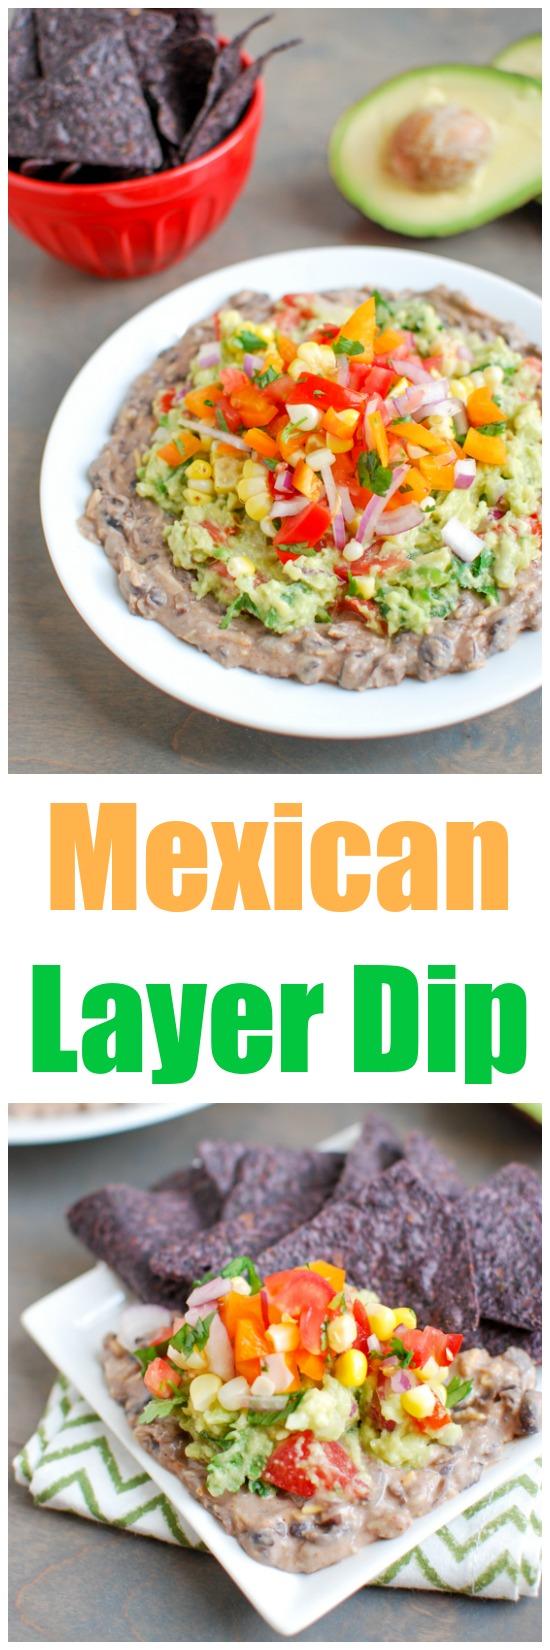 This Mexican Layer Dip is easy to make and full of flavor! With layers of spicy black bean dip, homemade guacamole and fresh corn salsa it's the perfect party appetizer or snack!